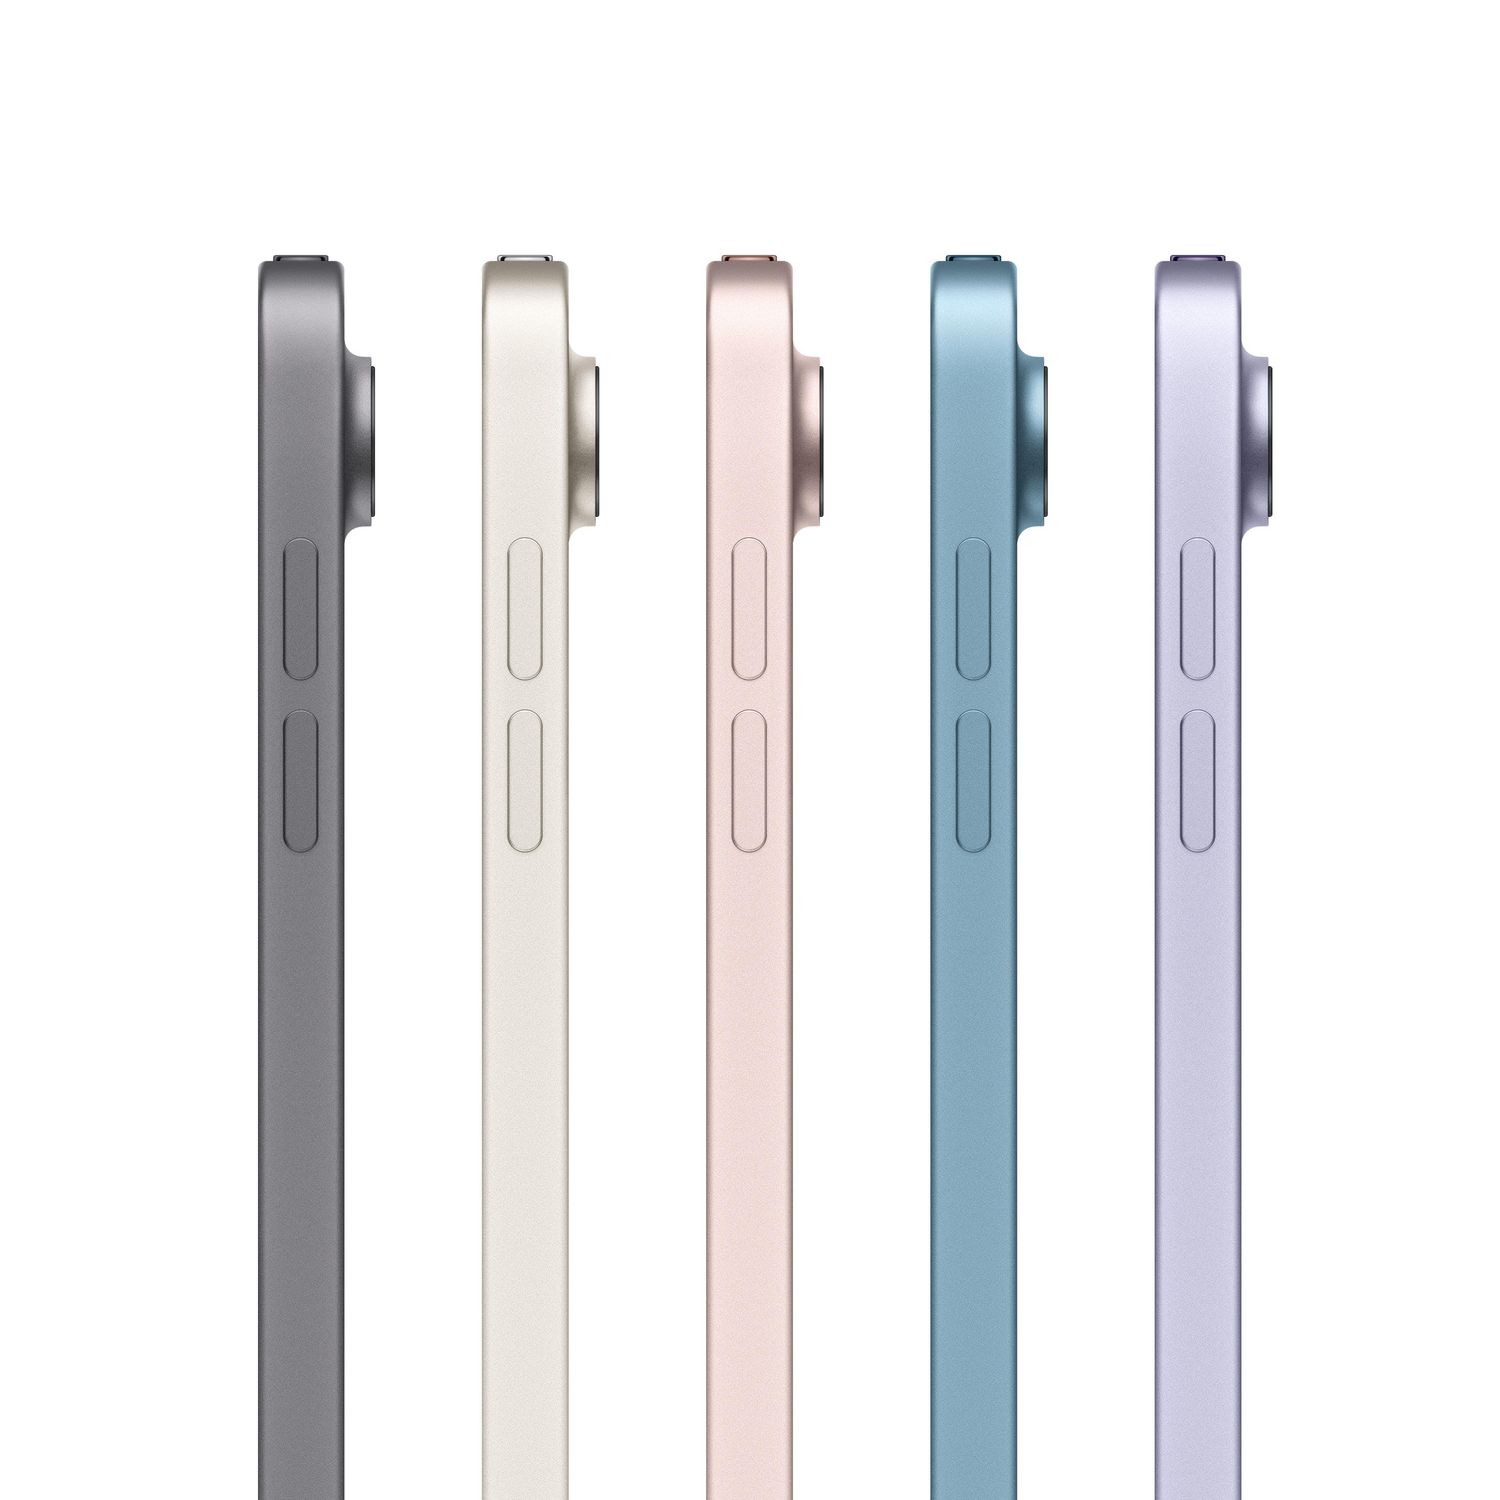 iPad Air (5th gen) 64g, Light. Bright. Full of might. Supercharged 